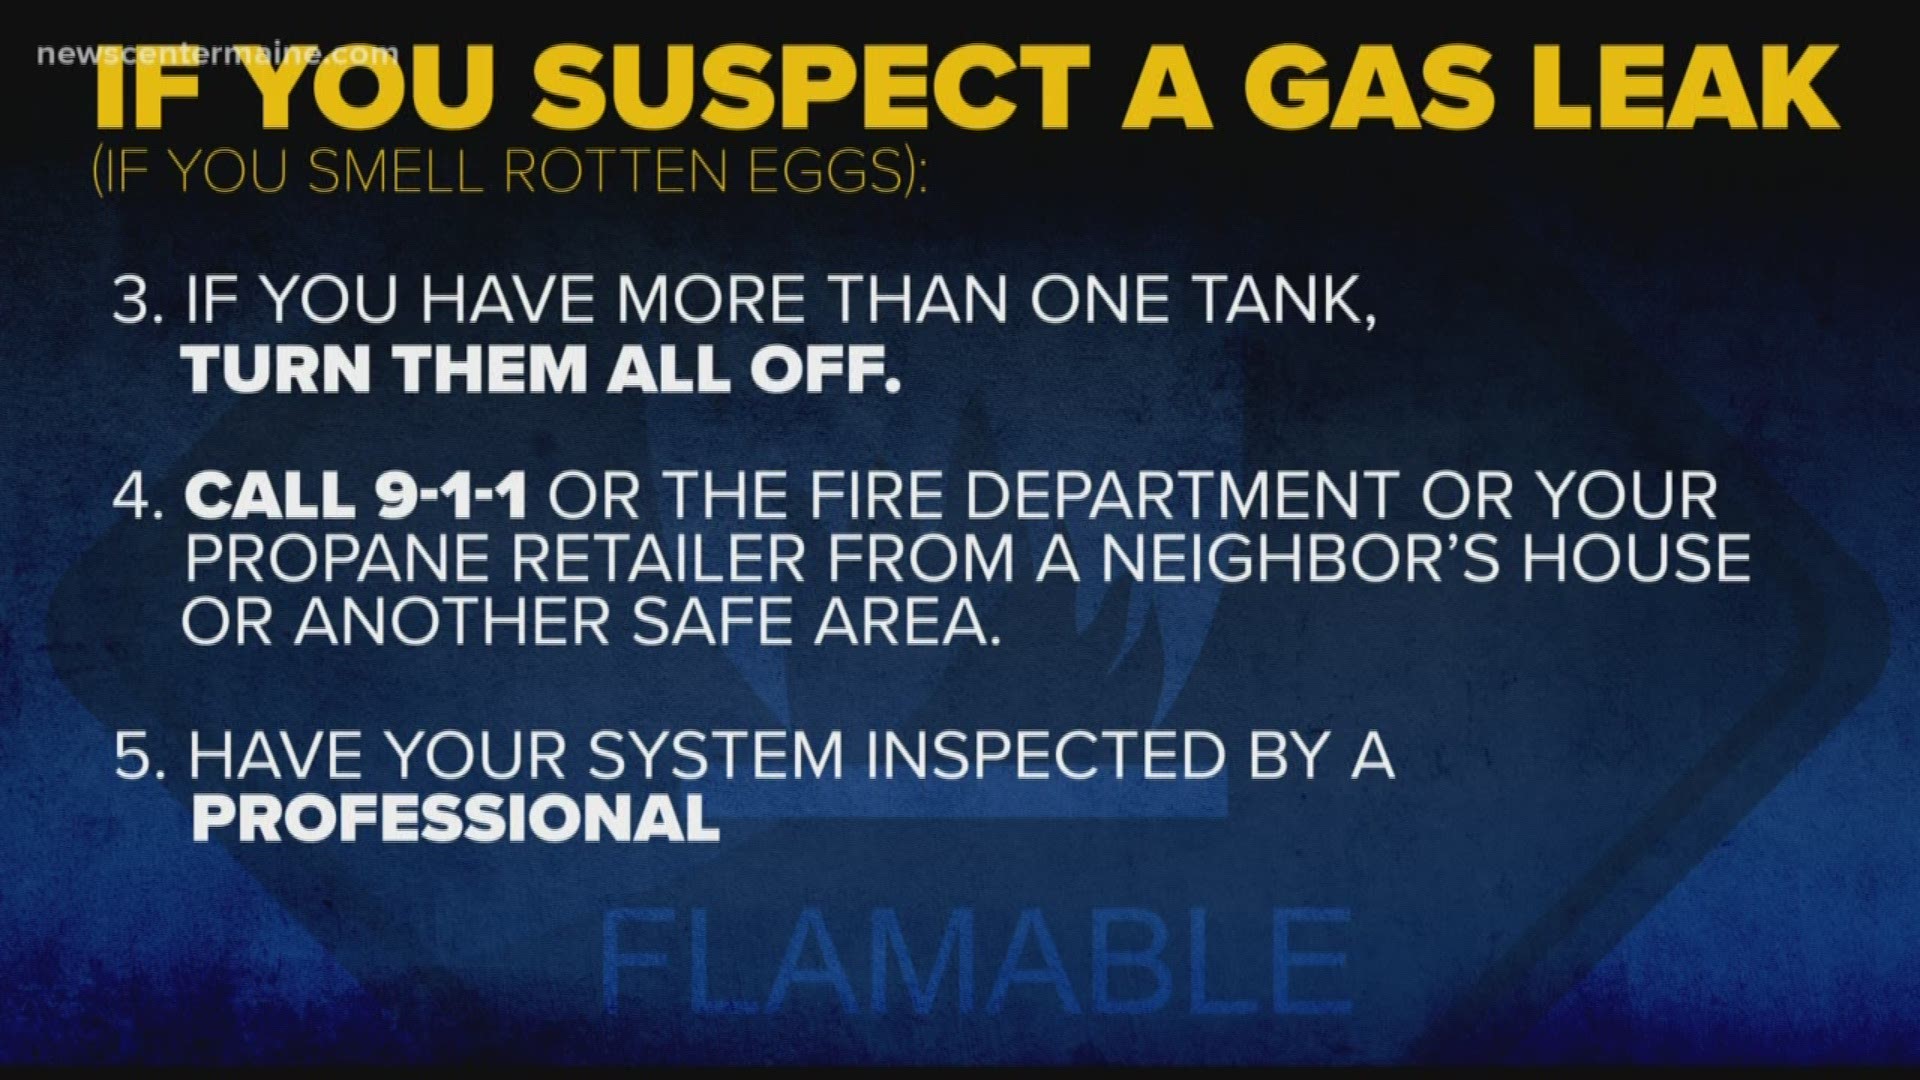 If you suspect a gas leak, follow these steps